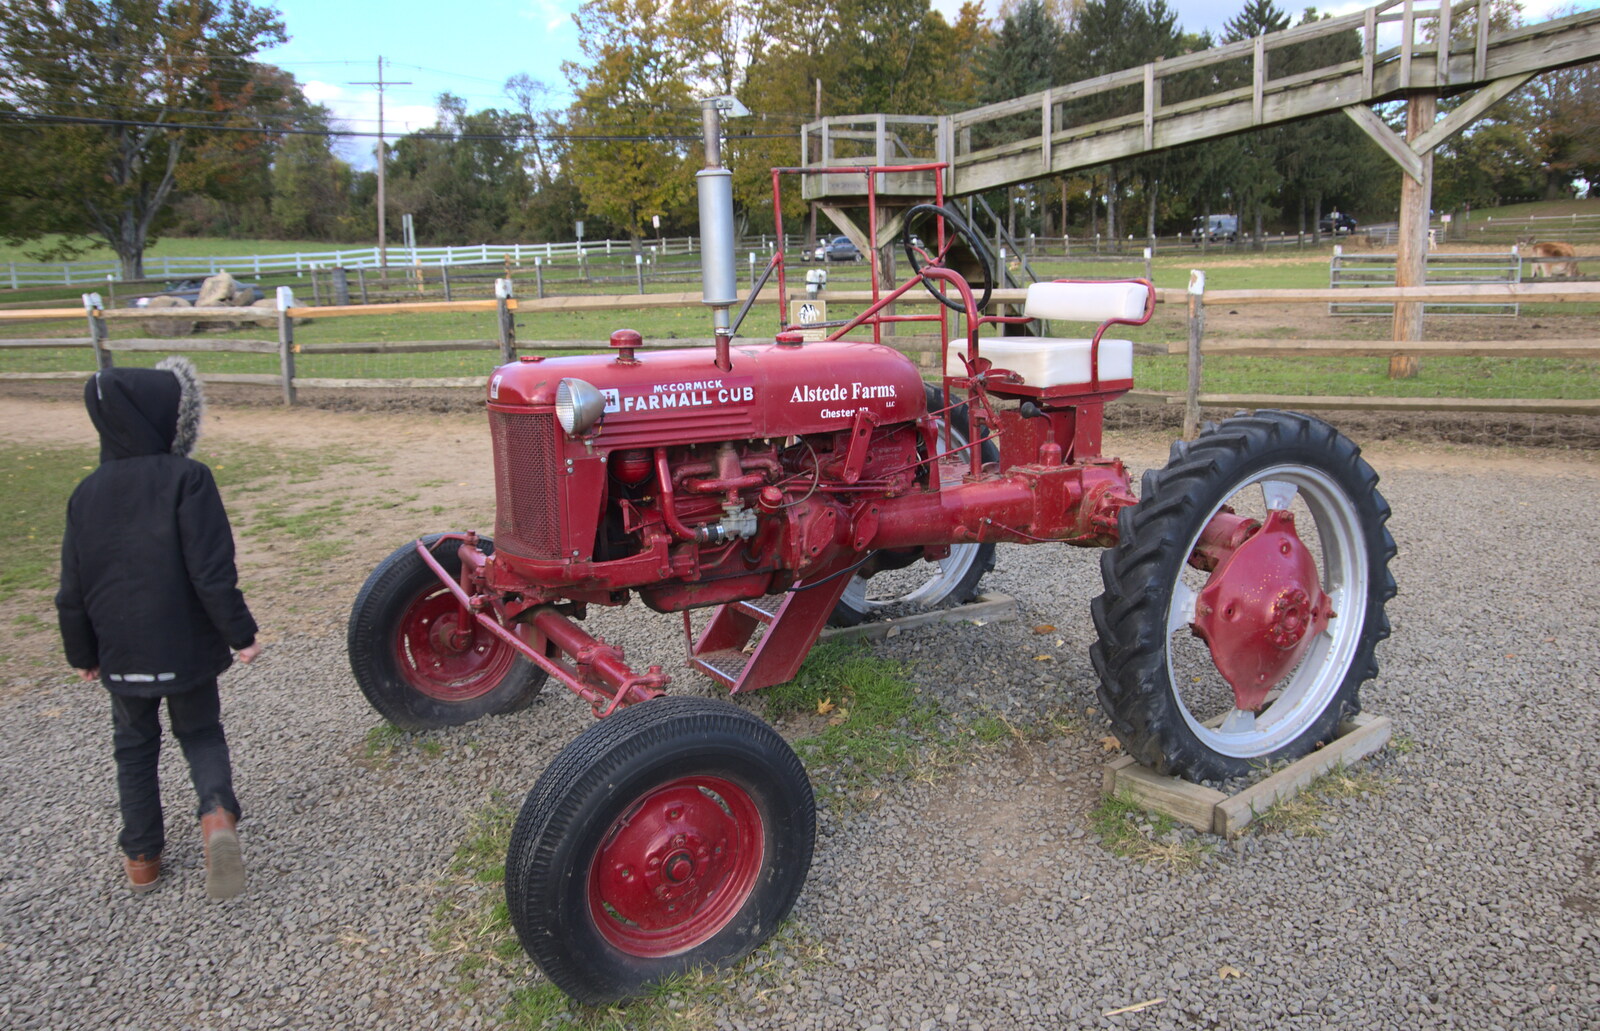 Fred looks like a Farmall Cub tractor from Pumpkin Picking at Alstede Farm, Chester, Morris County, New Jersey - 24th October 2018